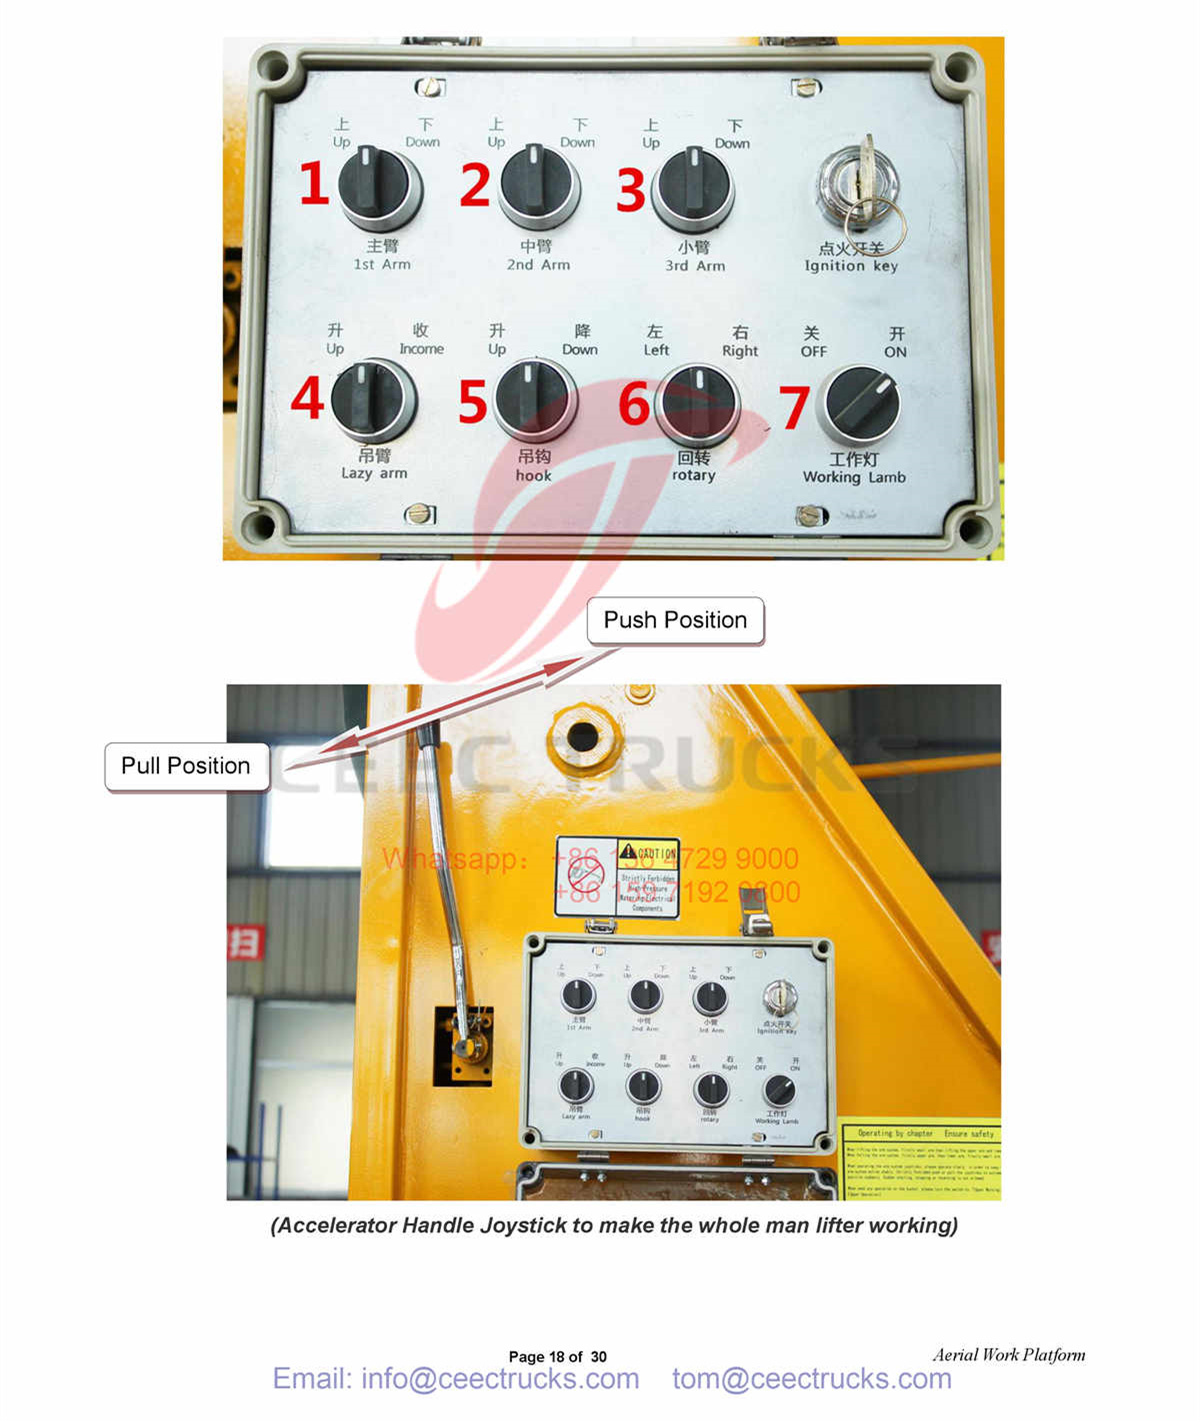 Intelligent Electrical control system for man lifter